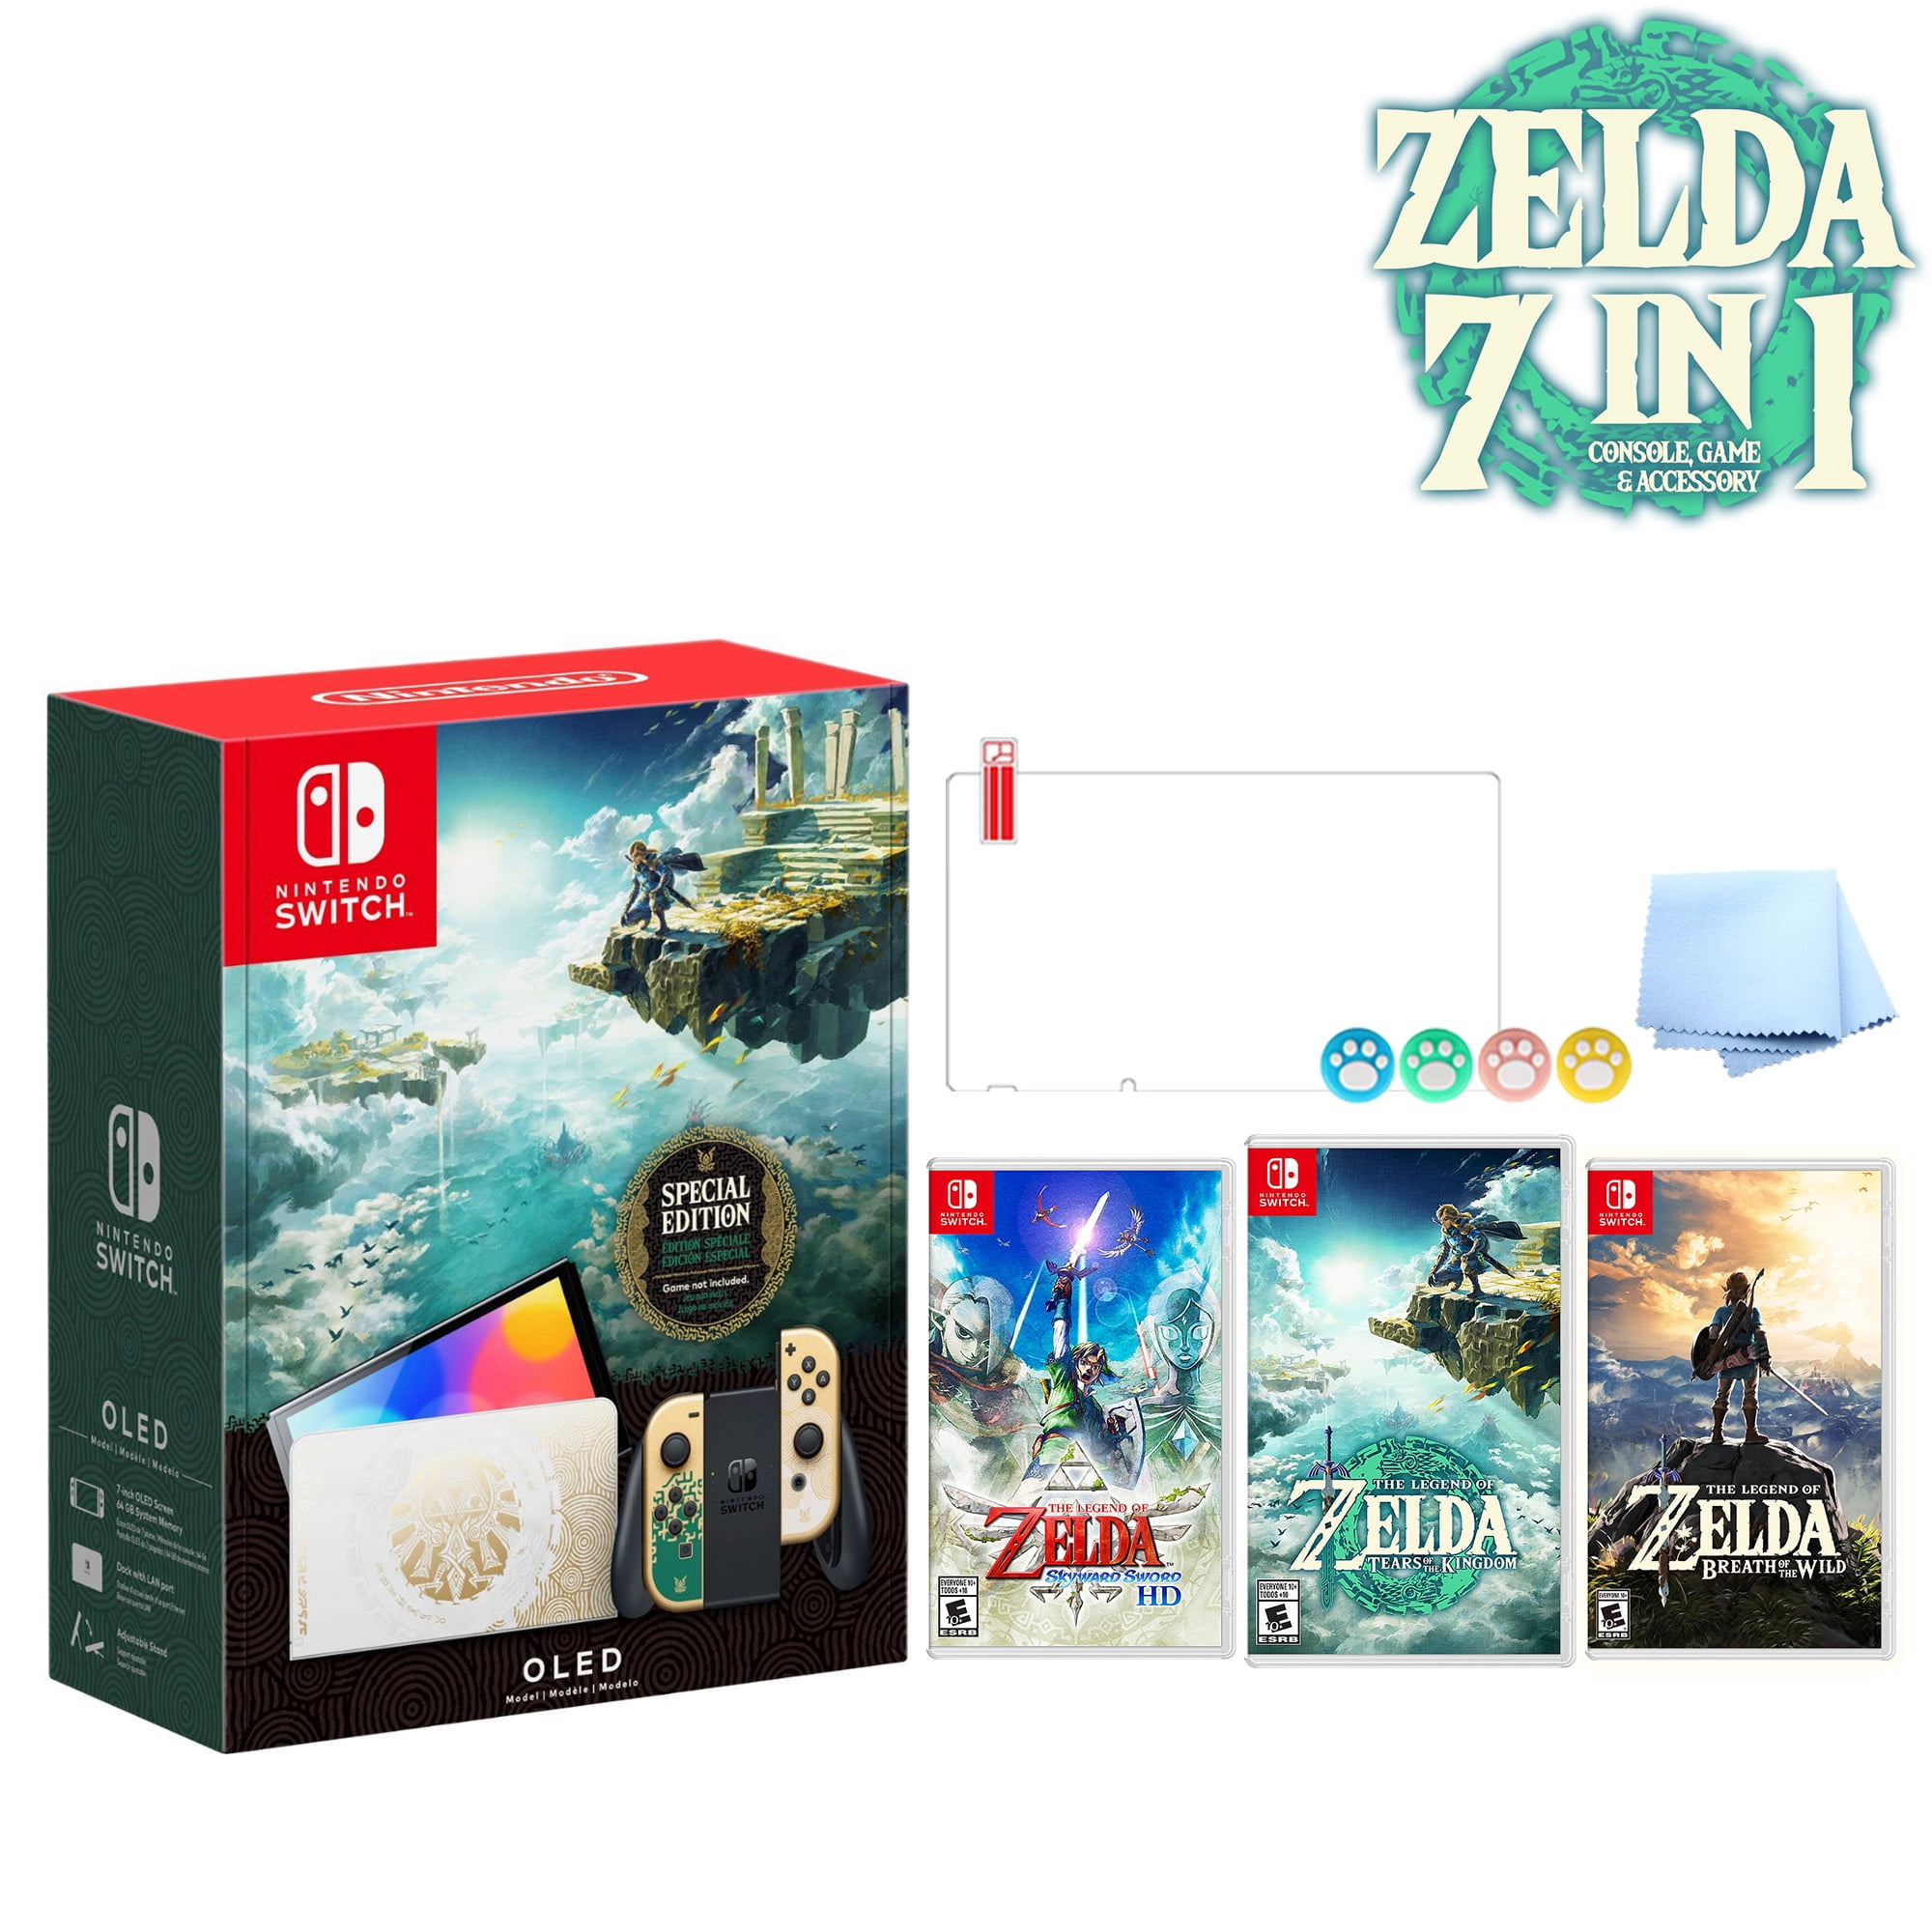 2023 Nintendo Switch OLED Zelda Limited Edition 7 in 1 Collection, Green &  Gold Joy-Con 64GB Console, Hylian Themed Dock, The Legend of Zelda 3 Games  